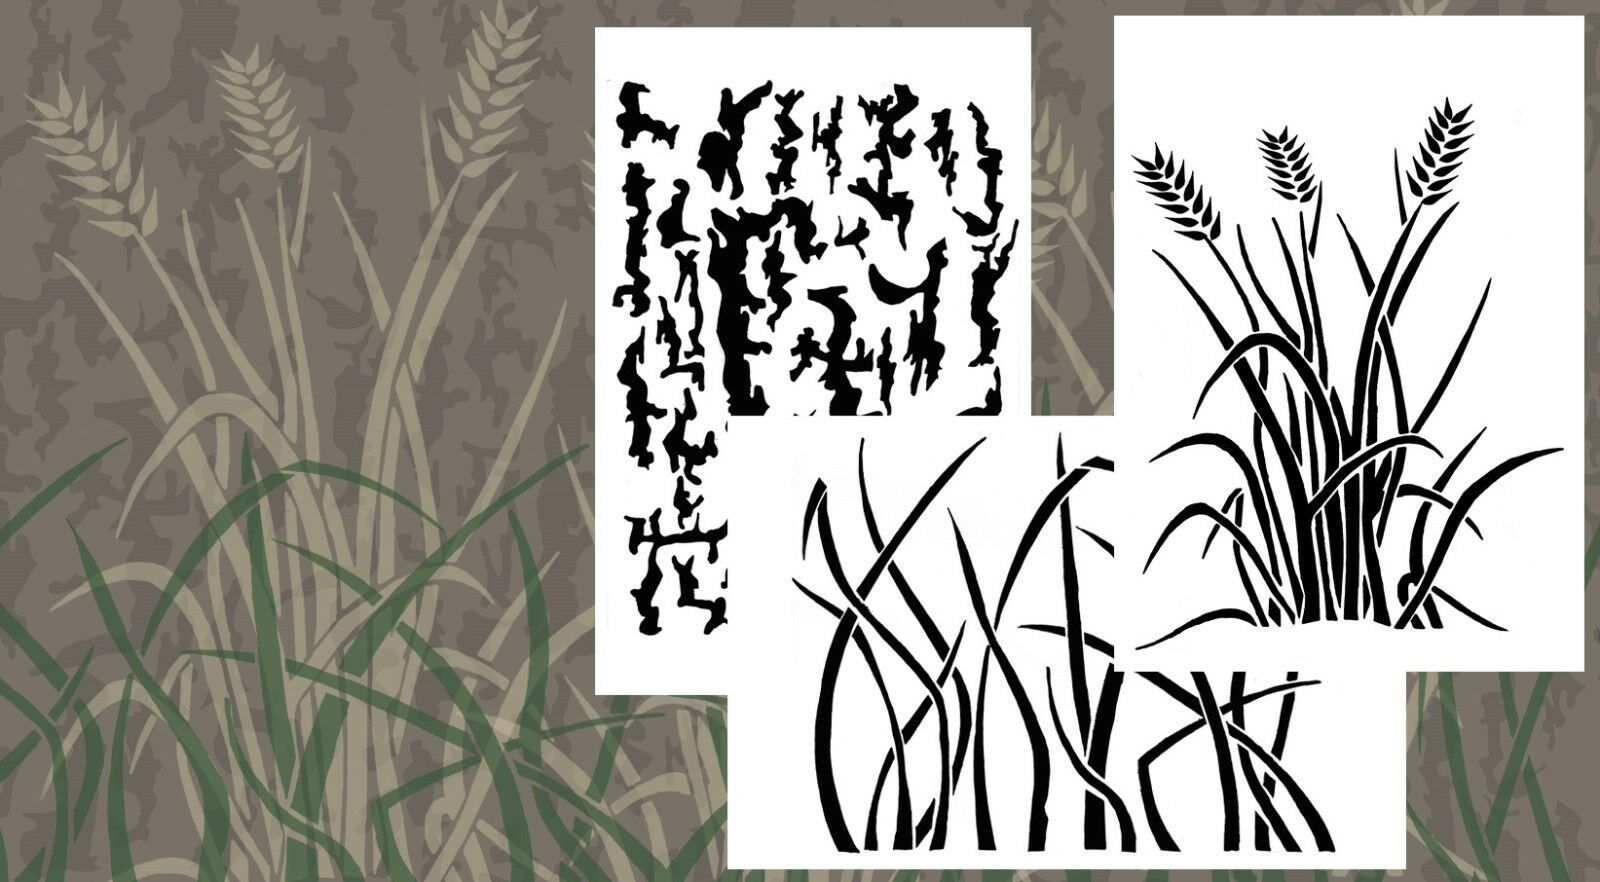 Primary image for Airbrush Spray Paint Jon Duck Boat Camoflage Stencils 3 Pack - BARK WHEAT GRASS